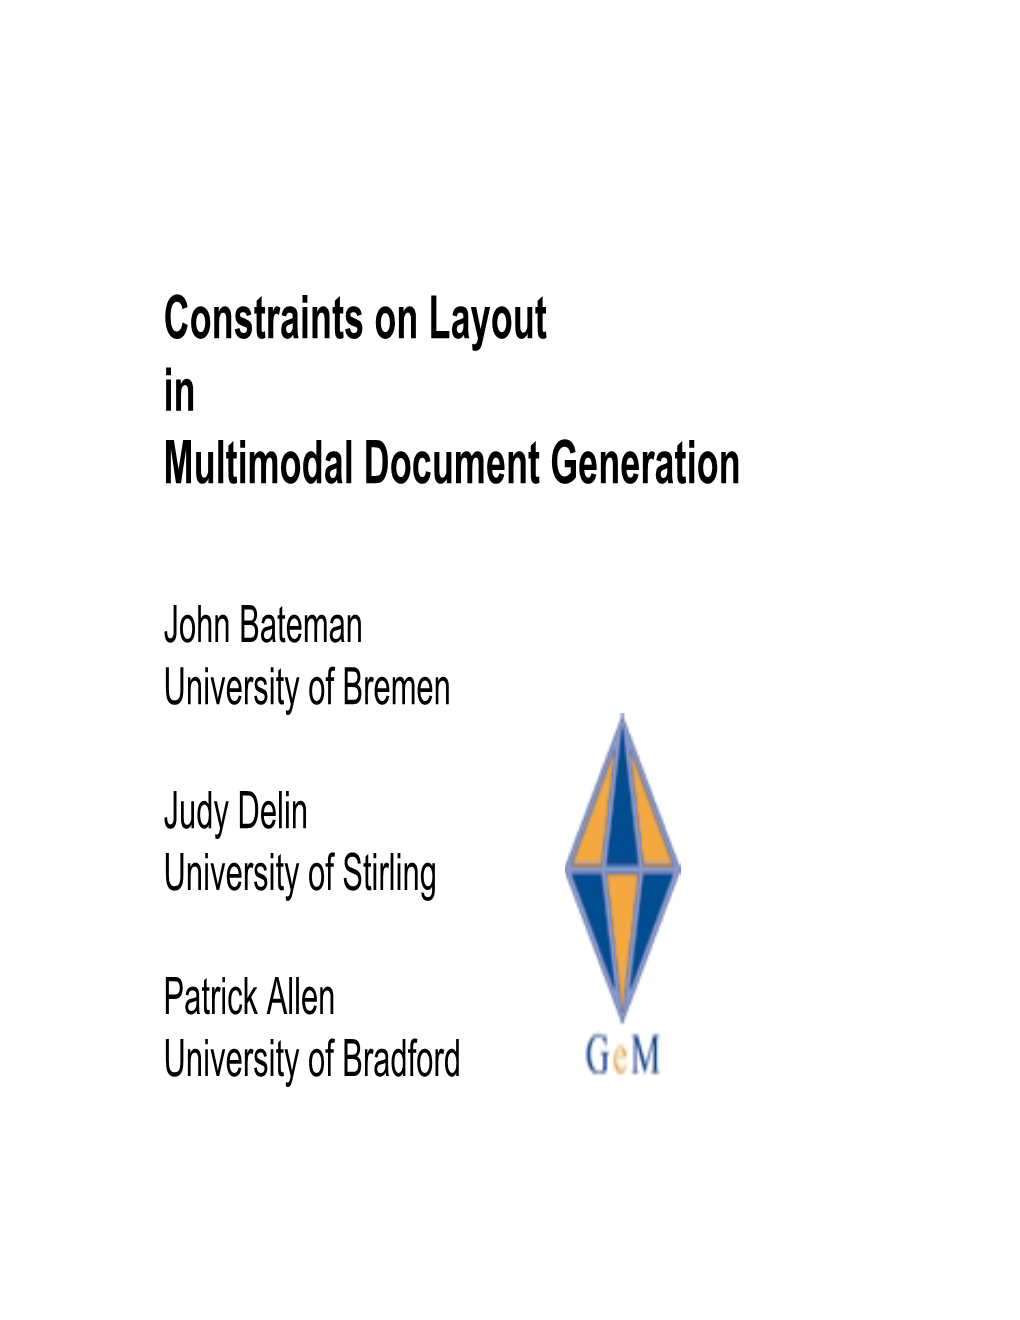 Constraints on Layout in Multimodal Document Generation